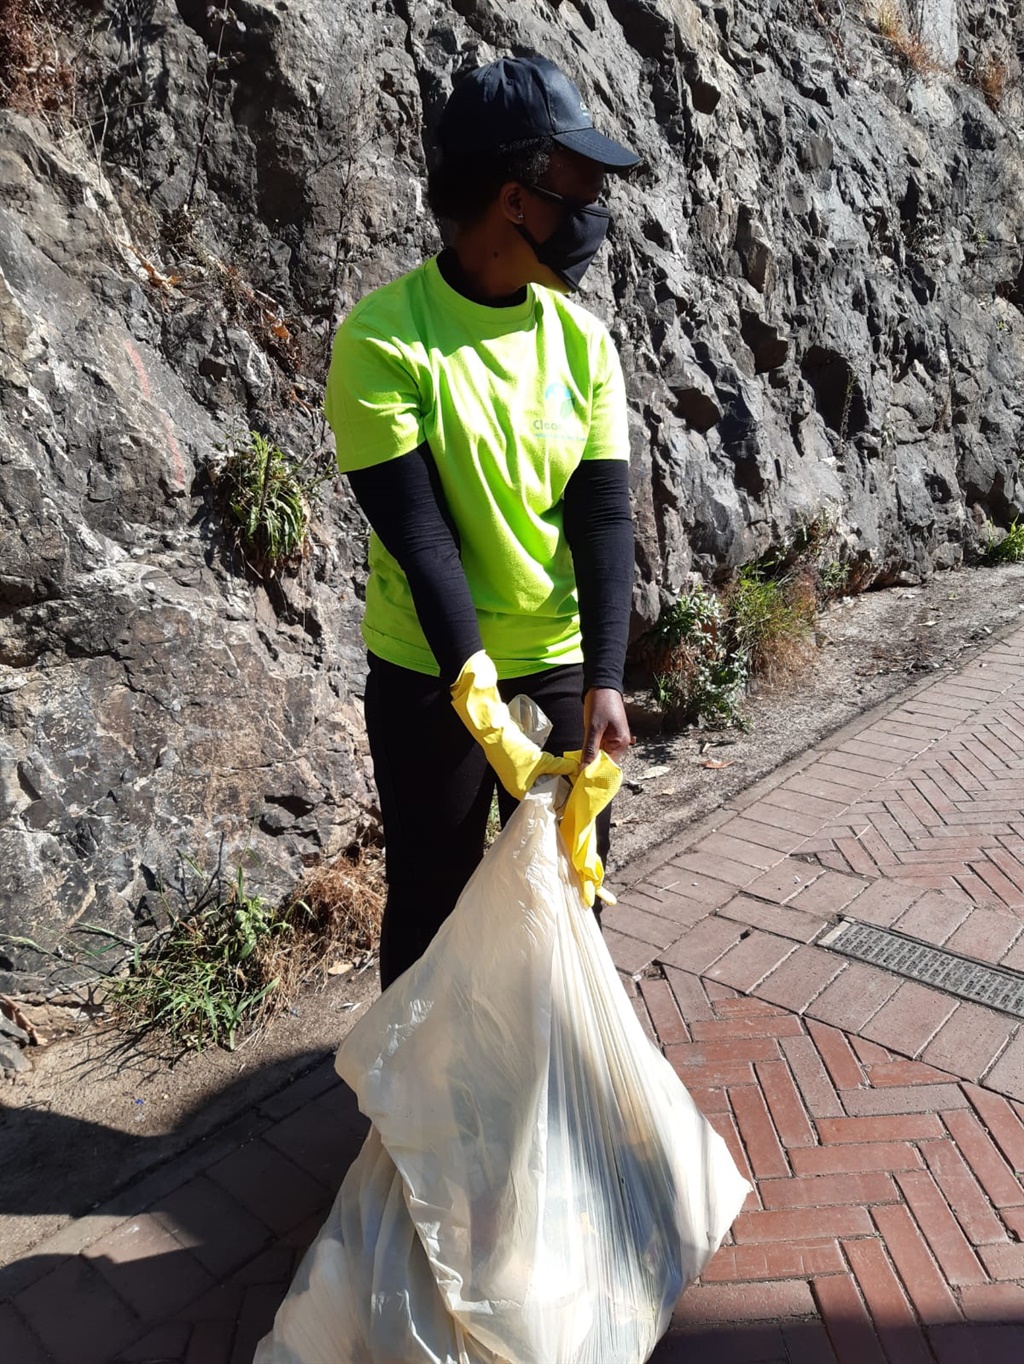 On Saturday, Clean City South Africa introduced th